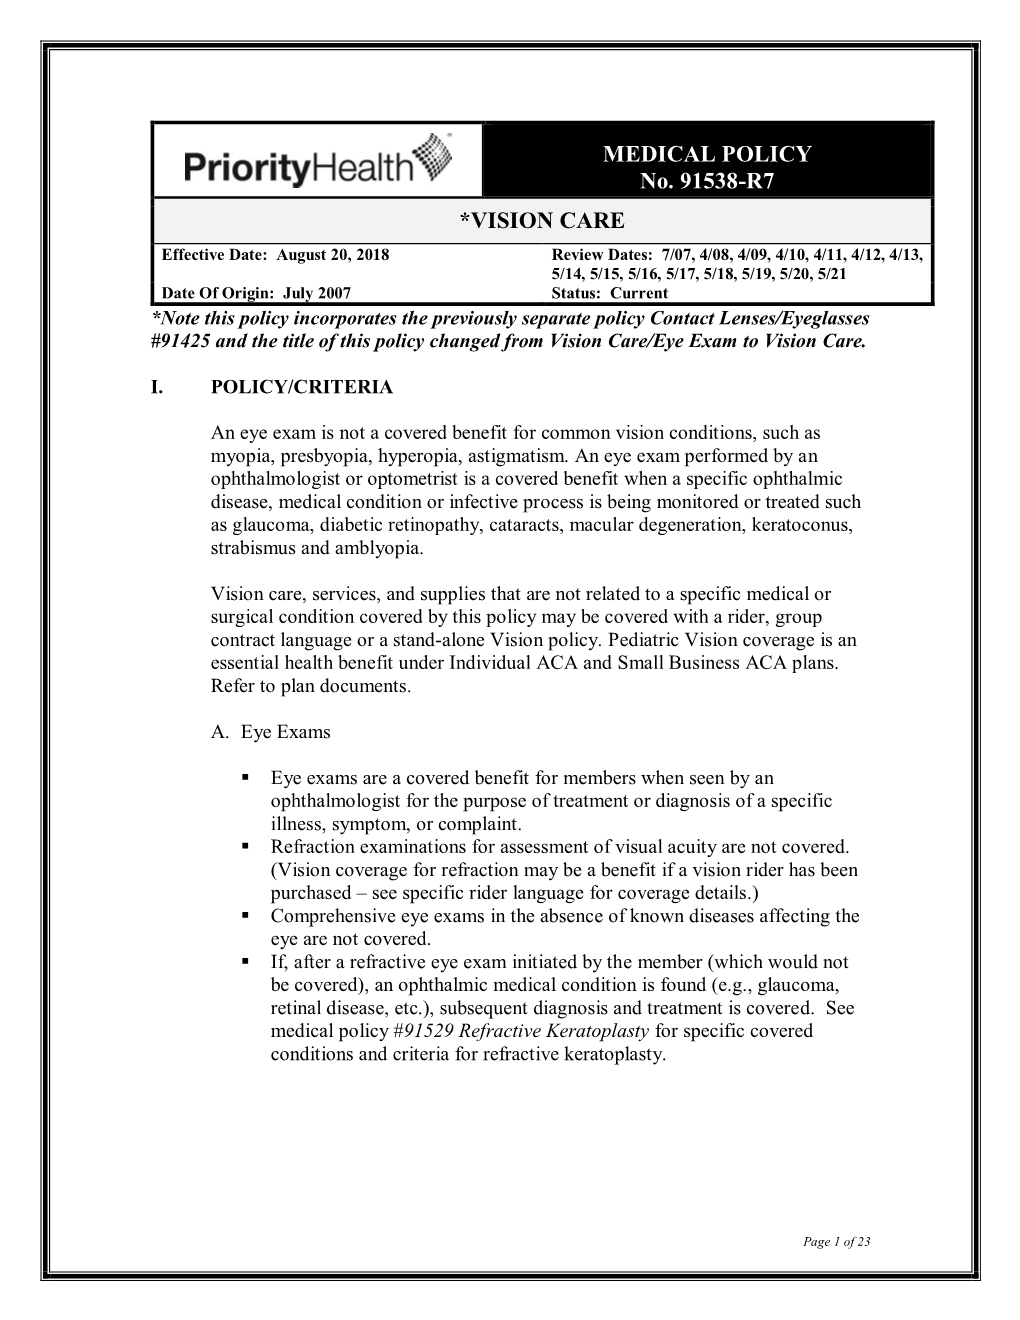 MEDICAL POLICY No. 91538-R7 *VISION CARE